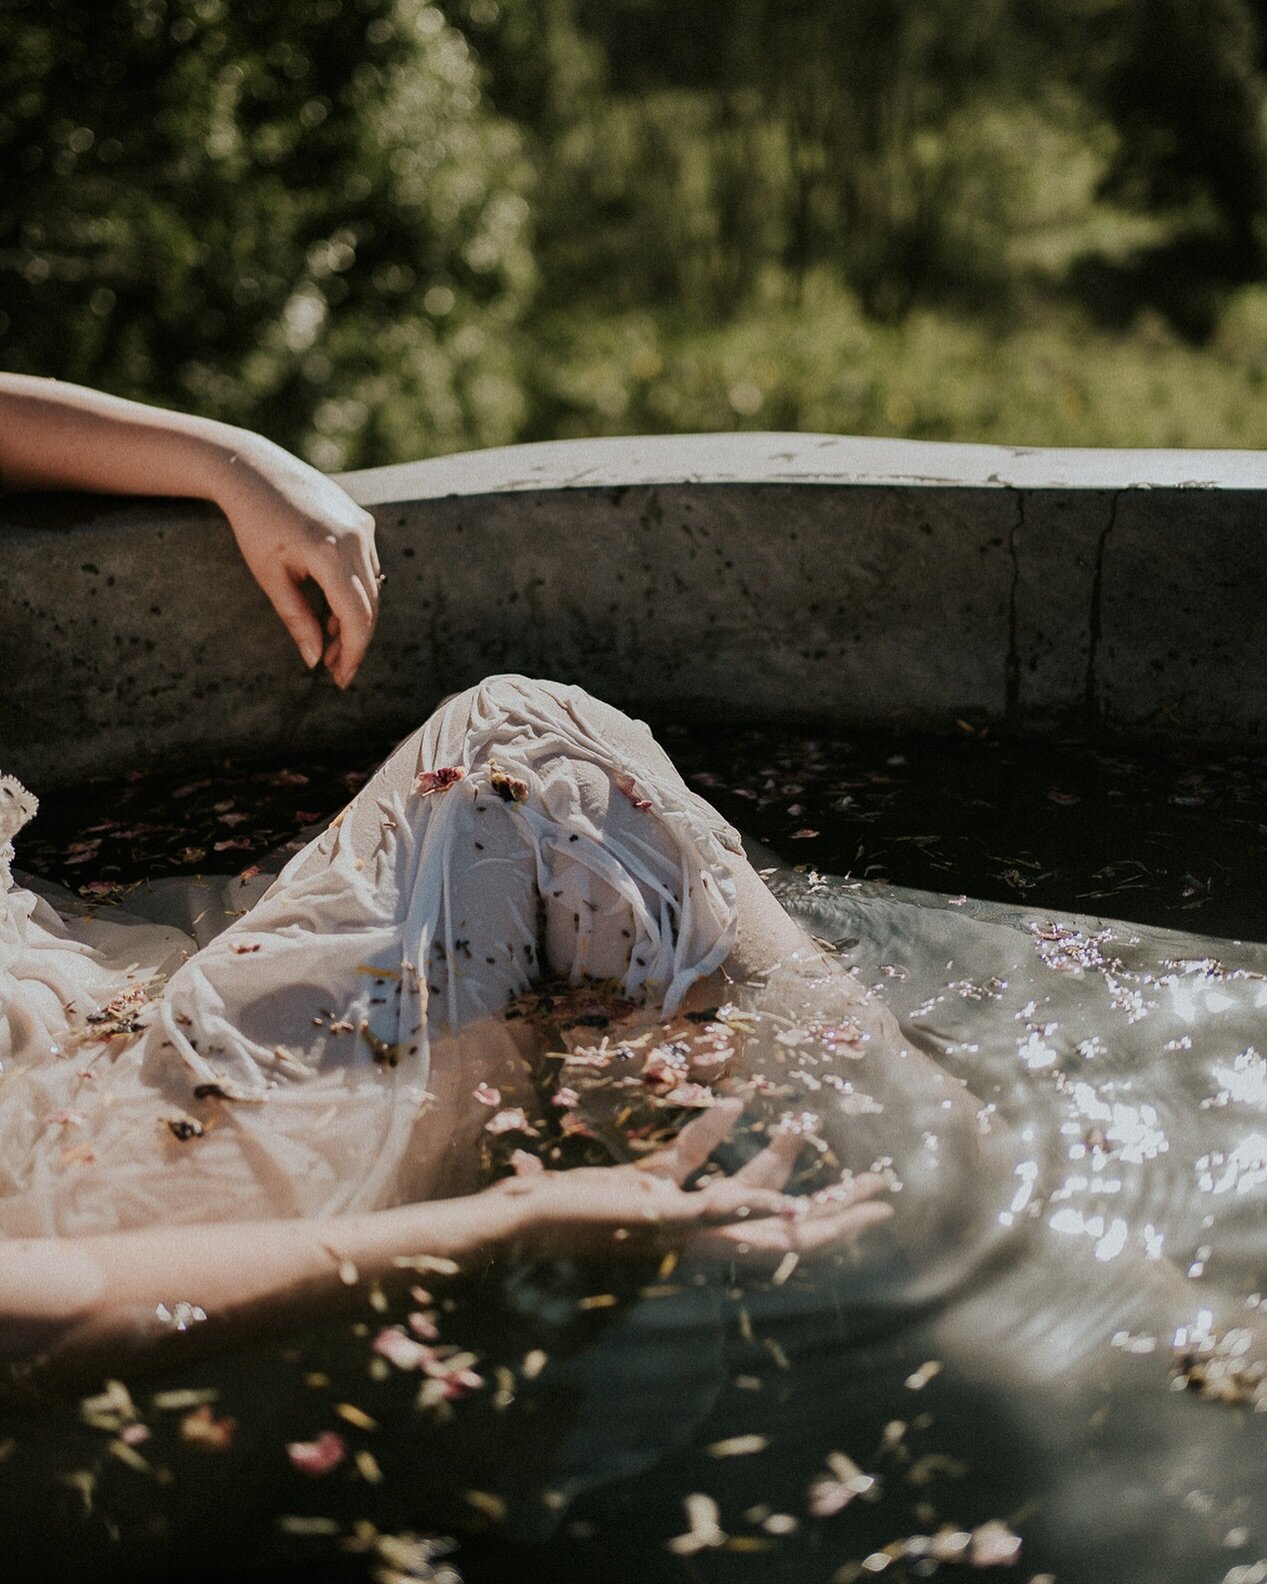 A dress in the bath isn&rsquo;t the most conventional approach, but it sure looks great on camera 🙏🏻 Feat. our gorgeous Bath Blooms created with @nimbinapothecary 💐

#ophelia #outdoorbath #boutiquestays #natureescape #weekendsaway  #flowerbath